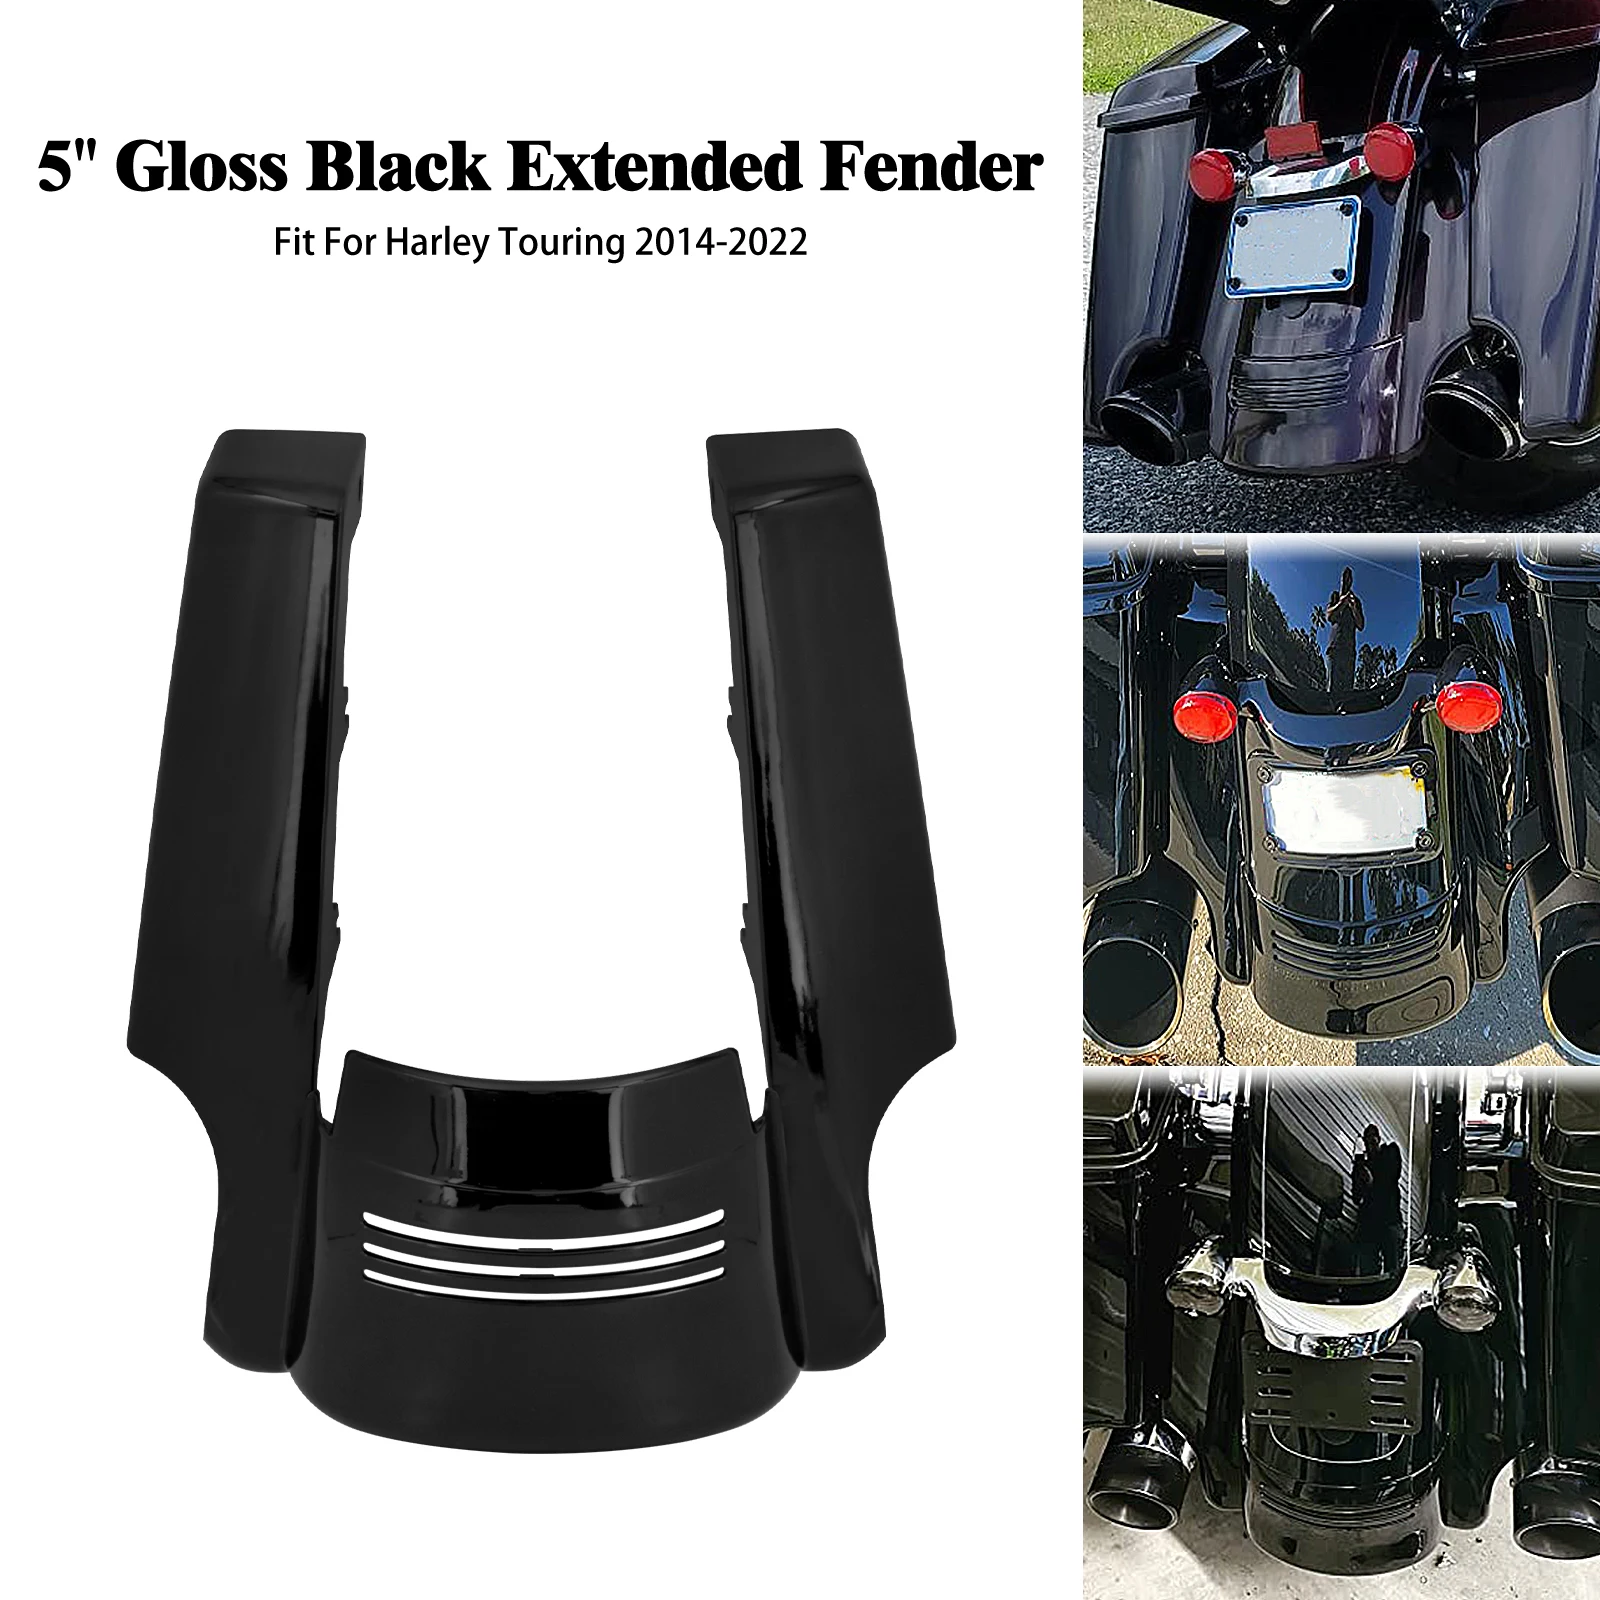 

Motorcycle Gloss Black Rear Fender Extension 5" Stretched For Harley Touring Electra Street Road Glide FLHR FLHT CVO 2014-2023